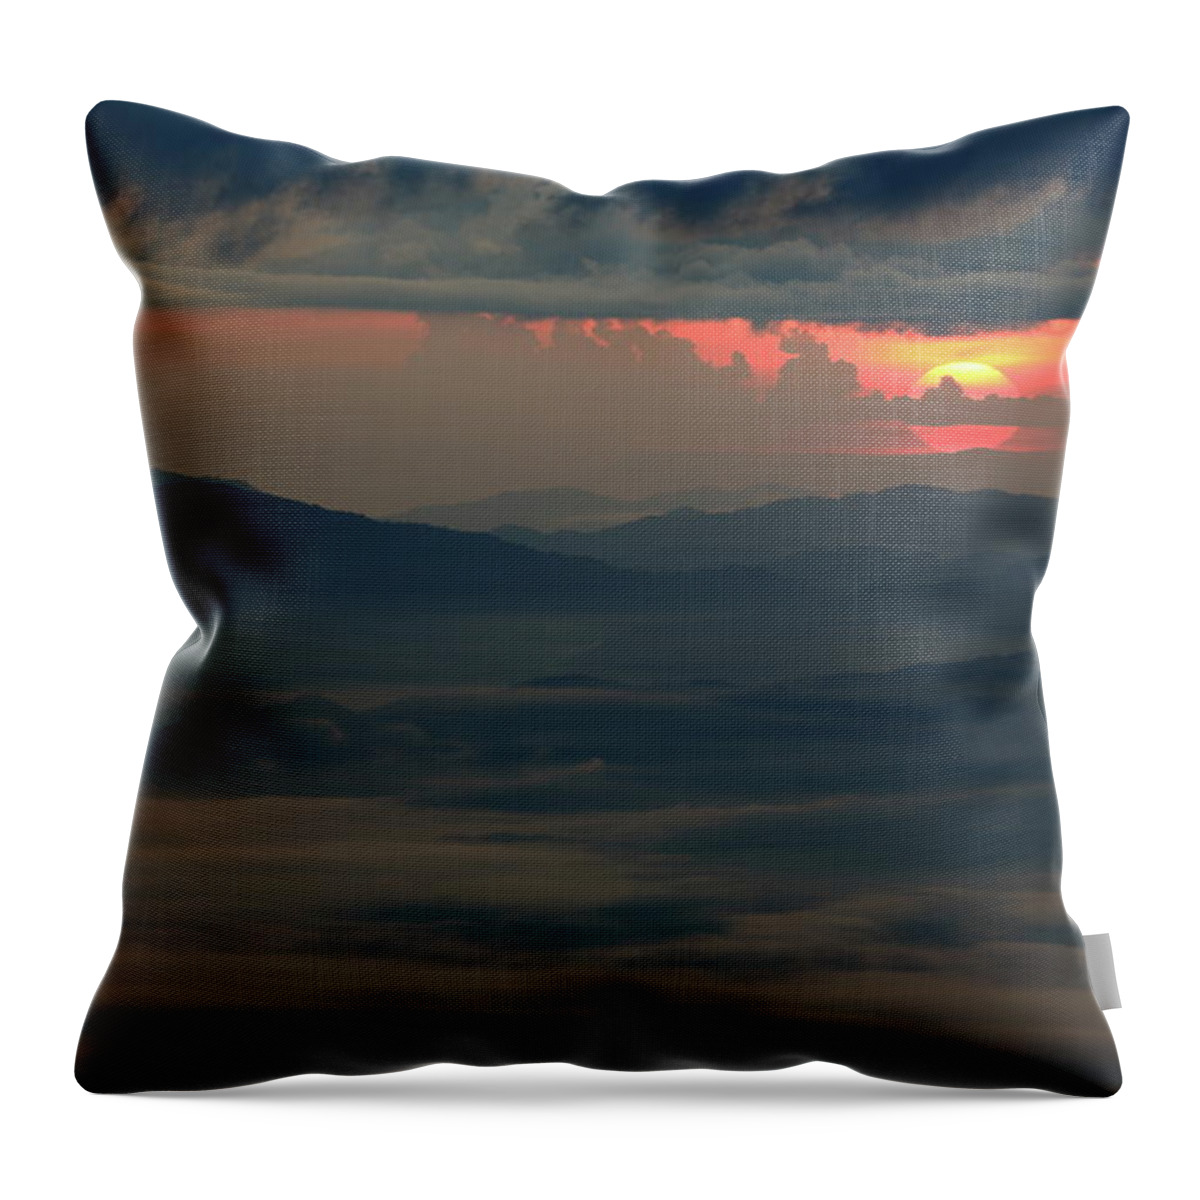 Tranquility Throw Pillow featuring the photograph Sun Rise At Doi Ang Khang, Chiangmai by Athit Perawongmetha